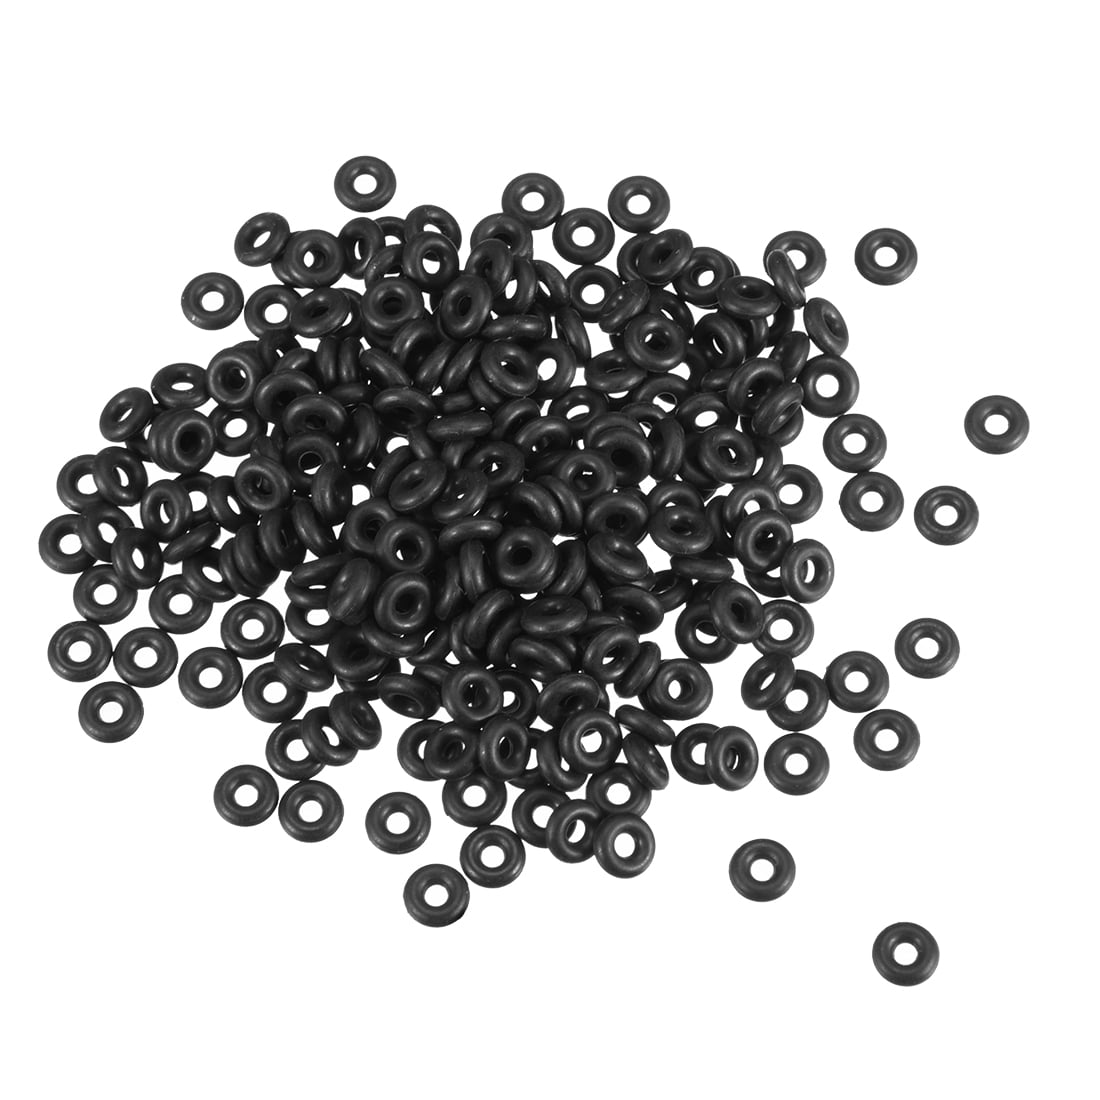 50 pcs ID 2 To 71mm Metric Nitrile Rubber O Rings Cross Section 2mm Seal Gasket